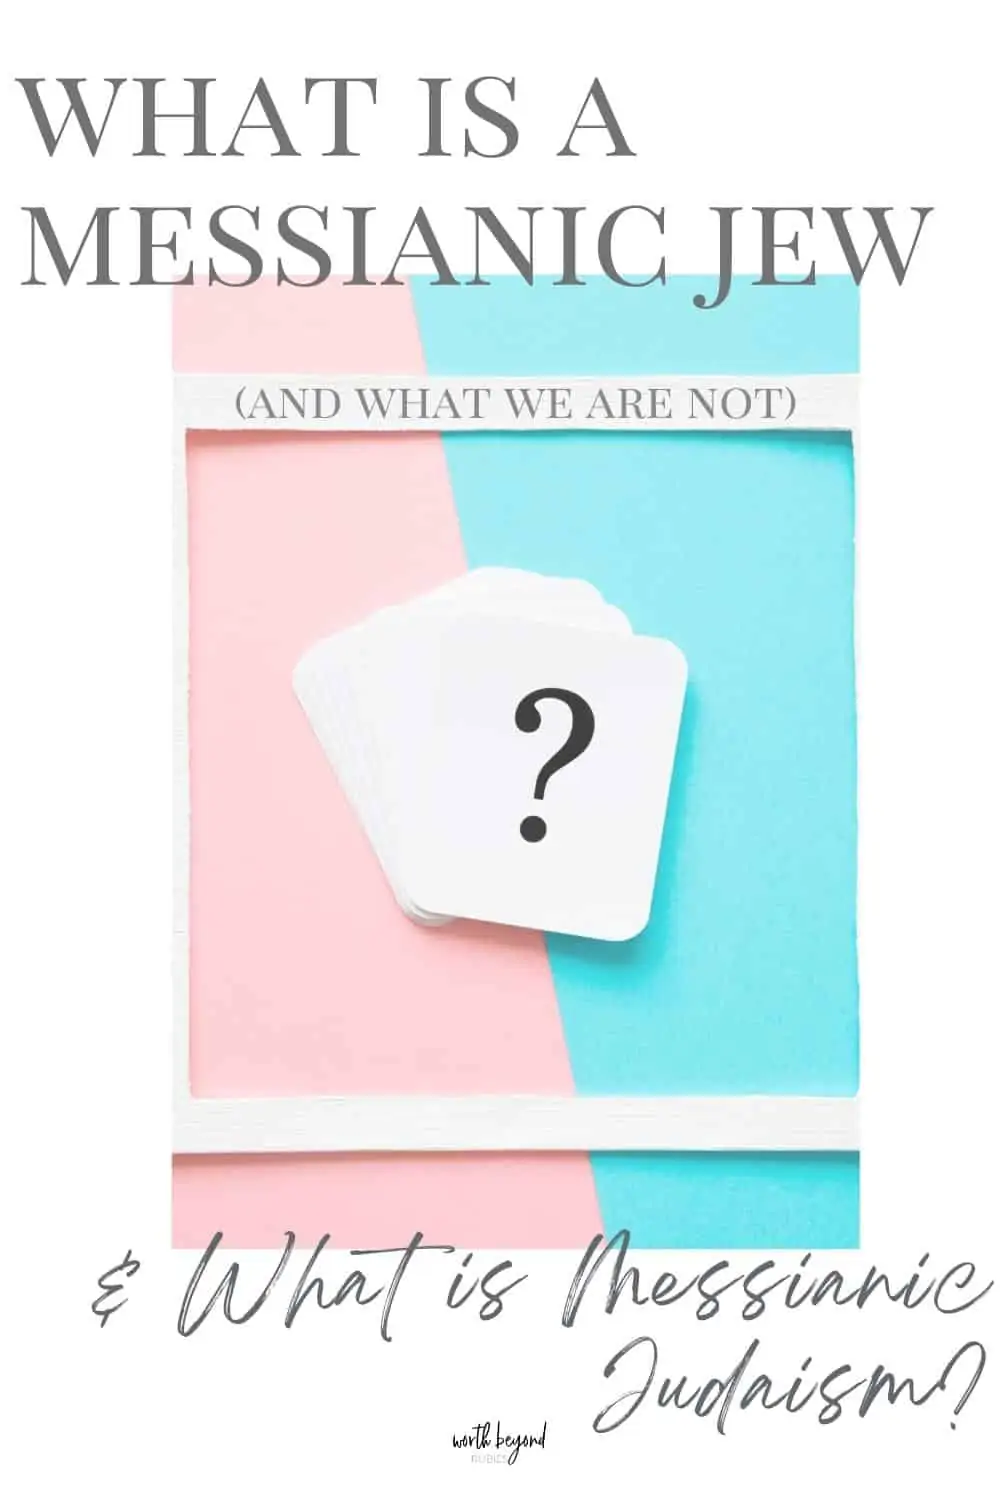 Card of question mark with white frame on pastel pink and turquoise blue background and Worth Beyond Rubies logo at bottom and text overlay that says What is a Messianic Jew and What We Are Not and What is Messianic Judaism?